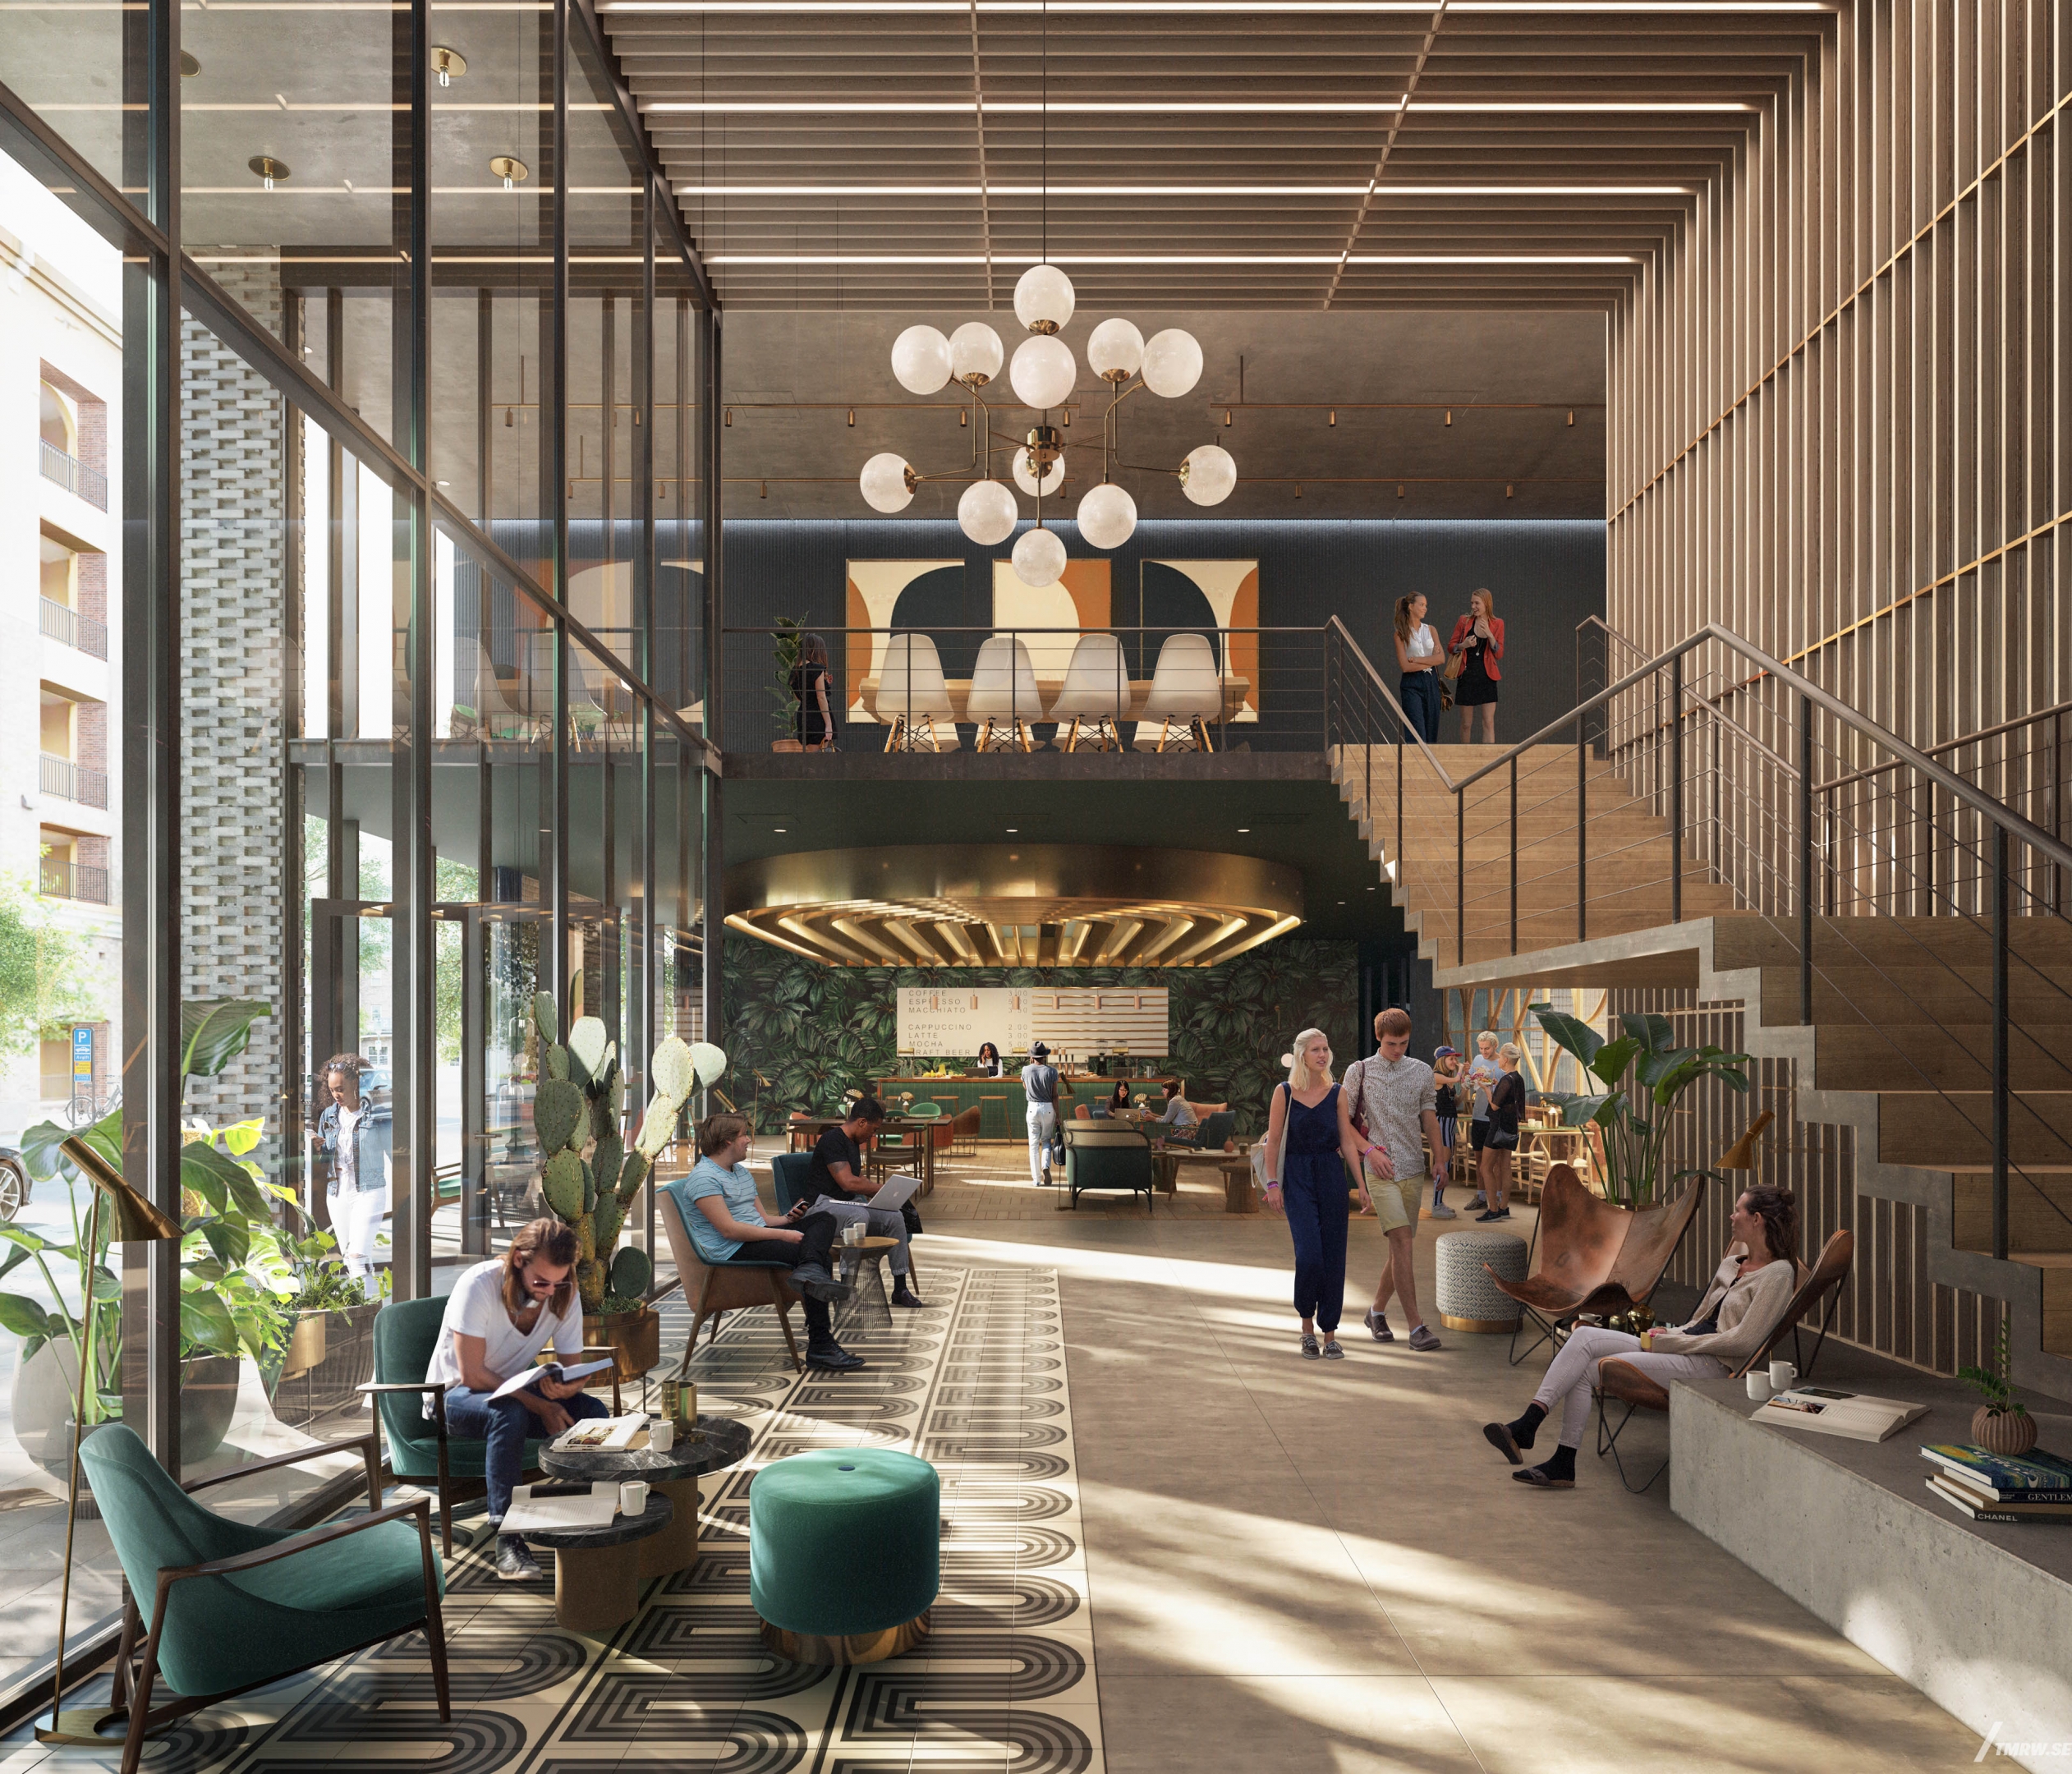 Architectural visualization of Multi Family for Gensler, an lobby area in day light from an interior view.